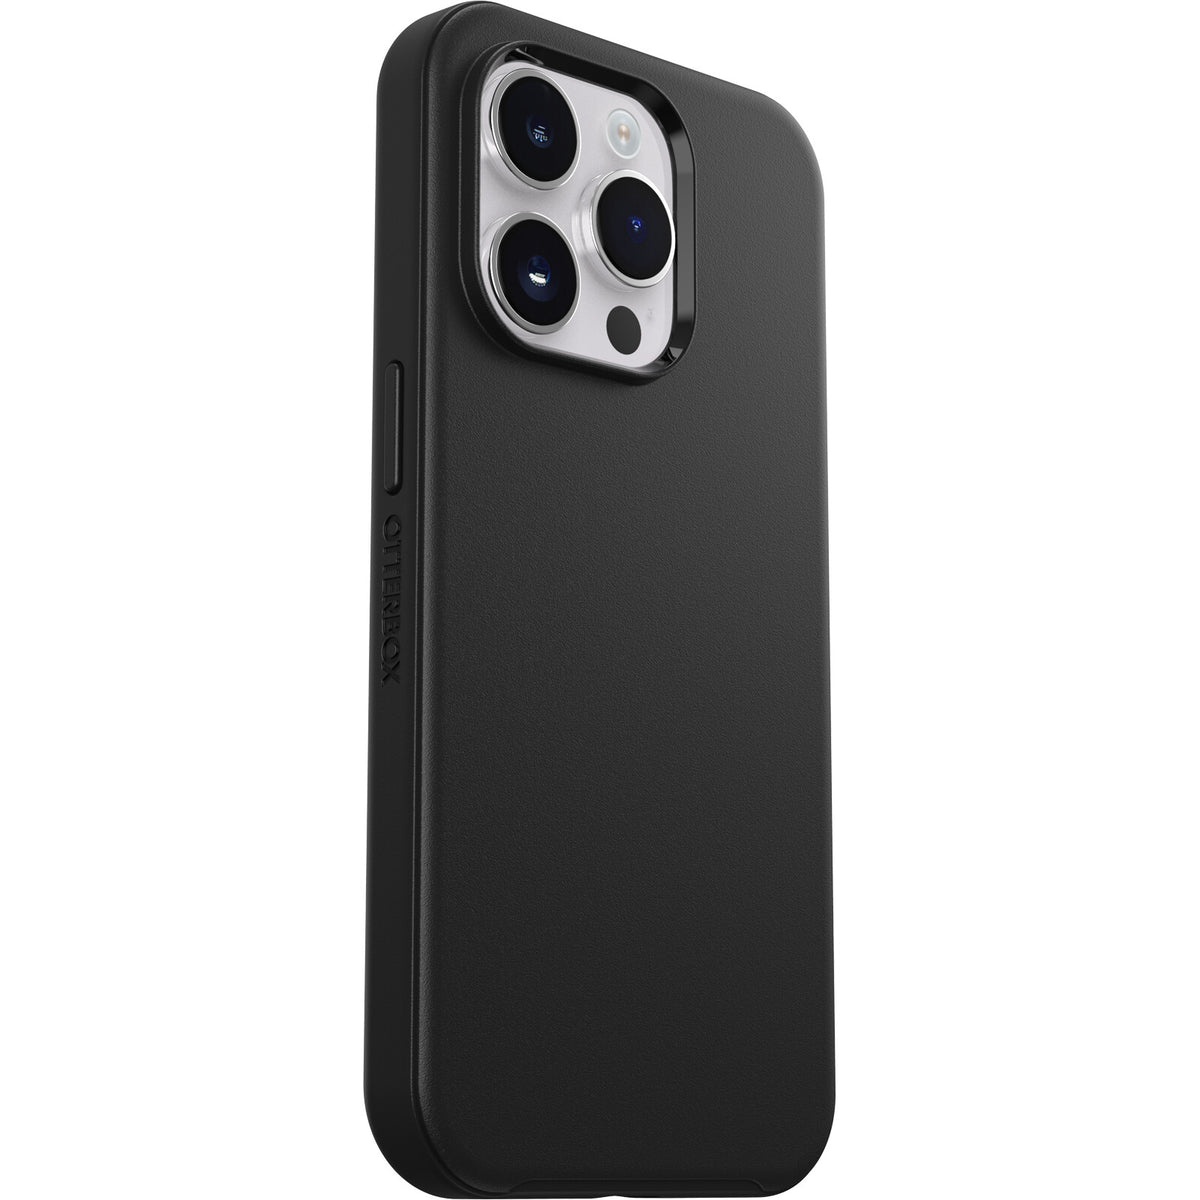 OtterBox Symmetry Case for iPhone 14 Pro Max in Black